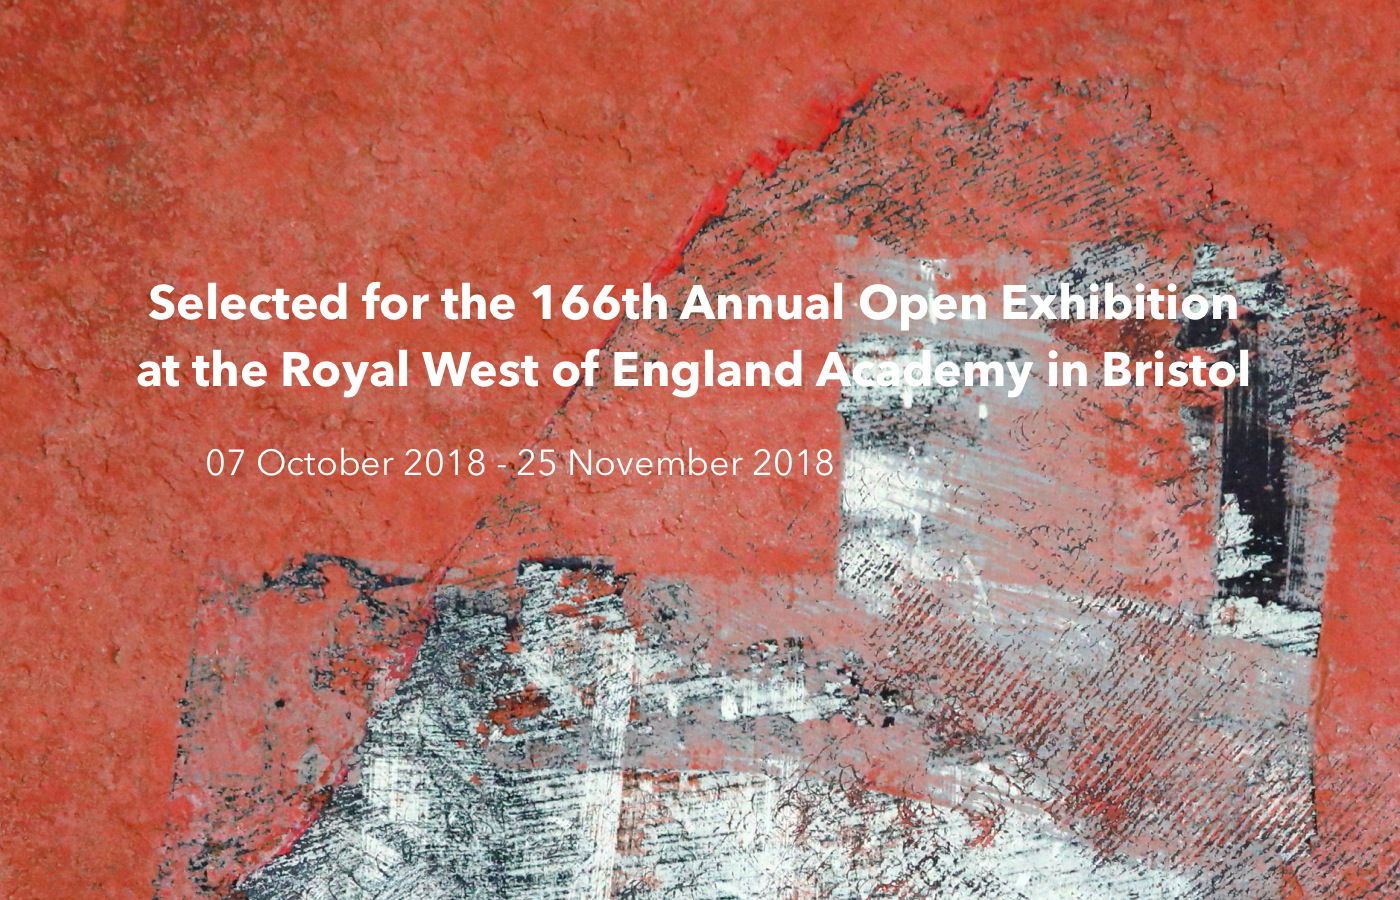 Selected for the 166th Annual Open Exhibition at the Royal West of England Academy in 2018